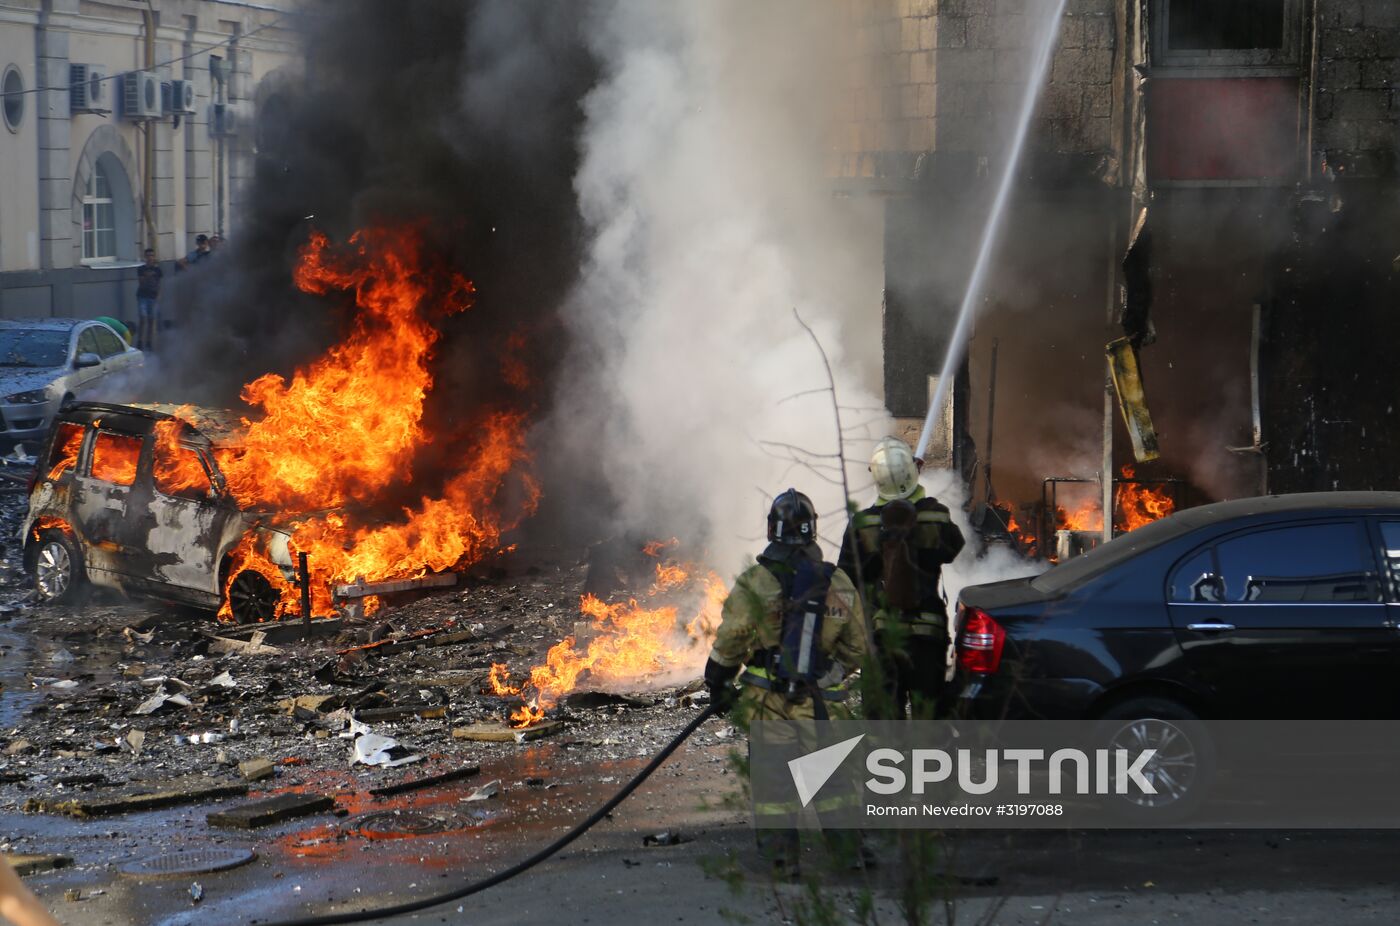 Ten-storied building cought fire in Rostov-on-Don